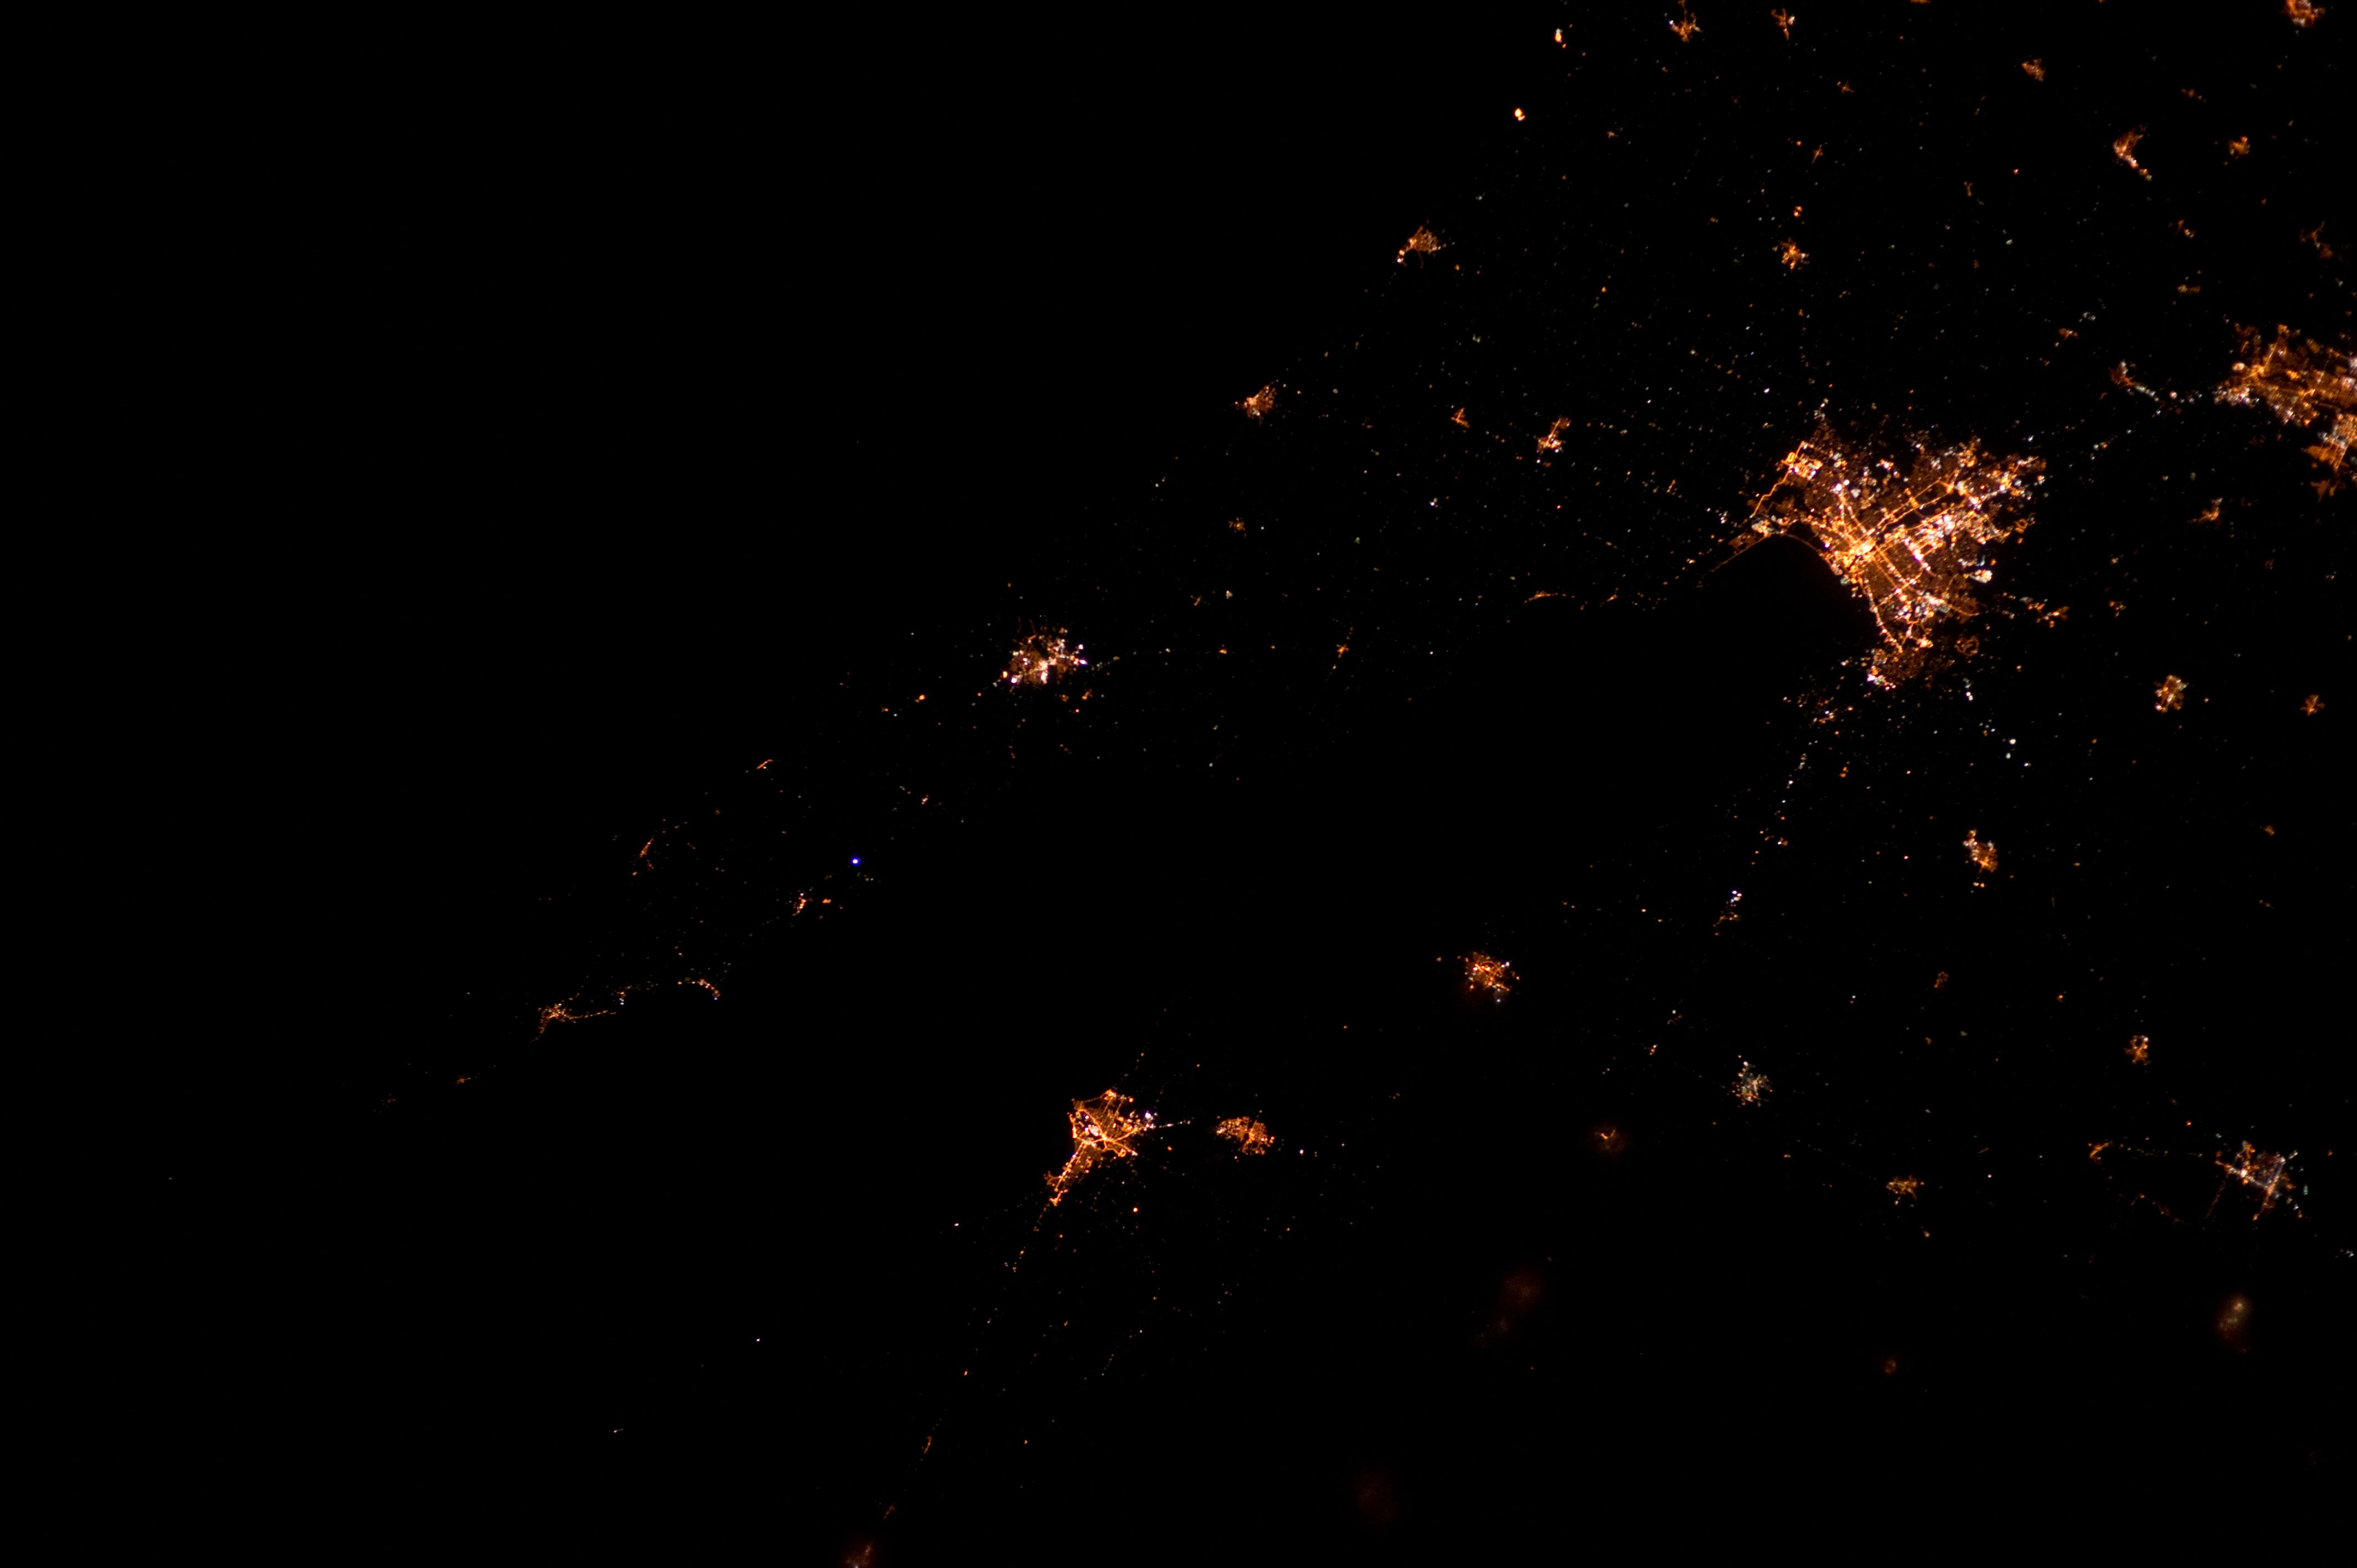 A portion of the micropolitan area, taken 1:10 AM CDT, March 27, 2012 during Expedition 30 of the ISS.